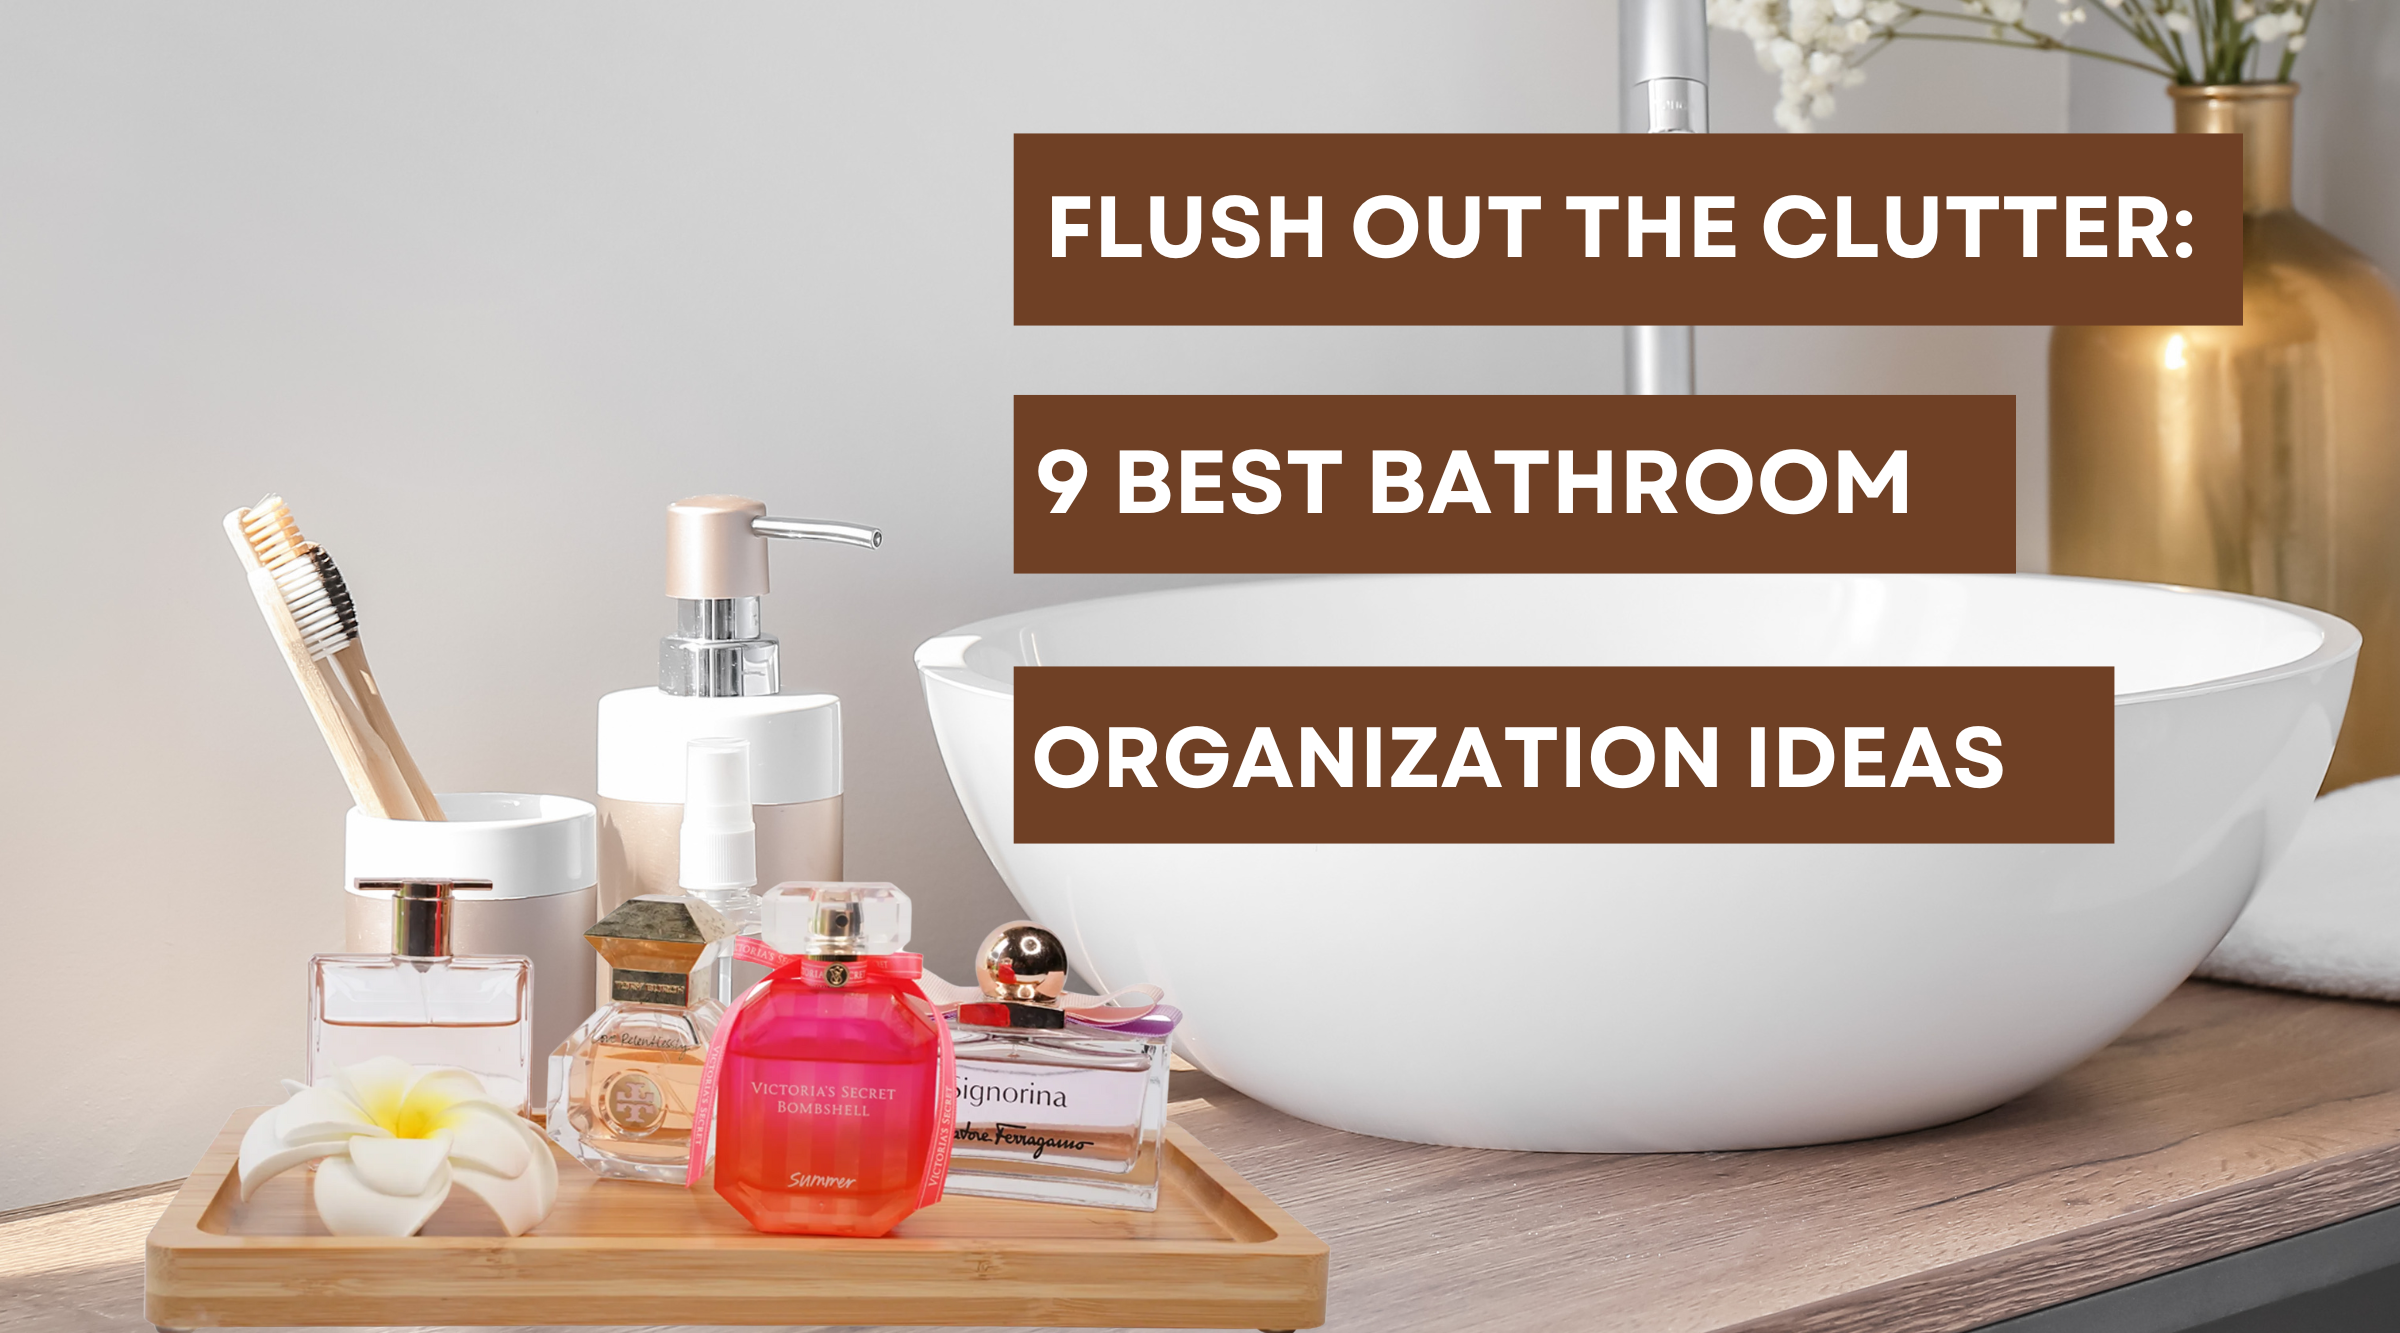 How to Banish Bathroom Clutter - The New York Times